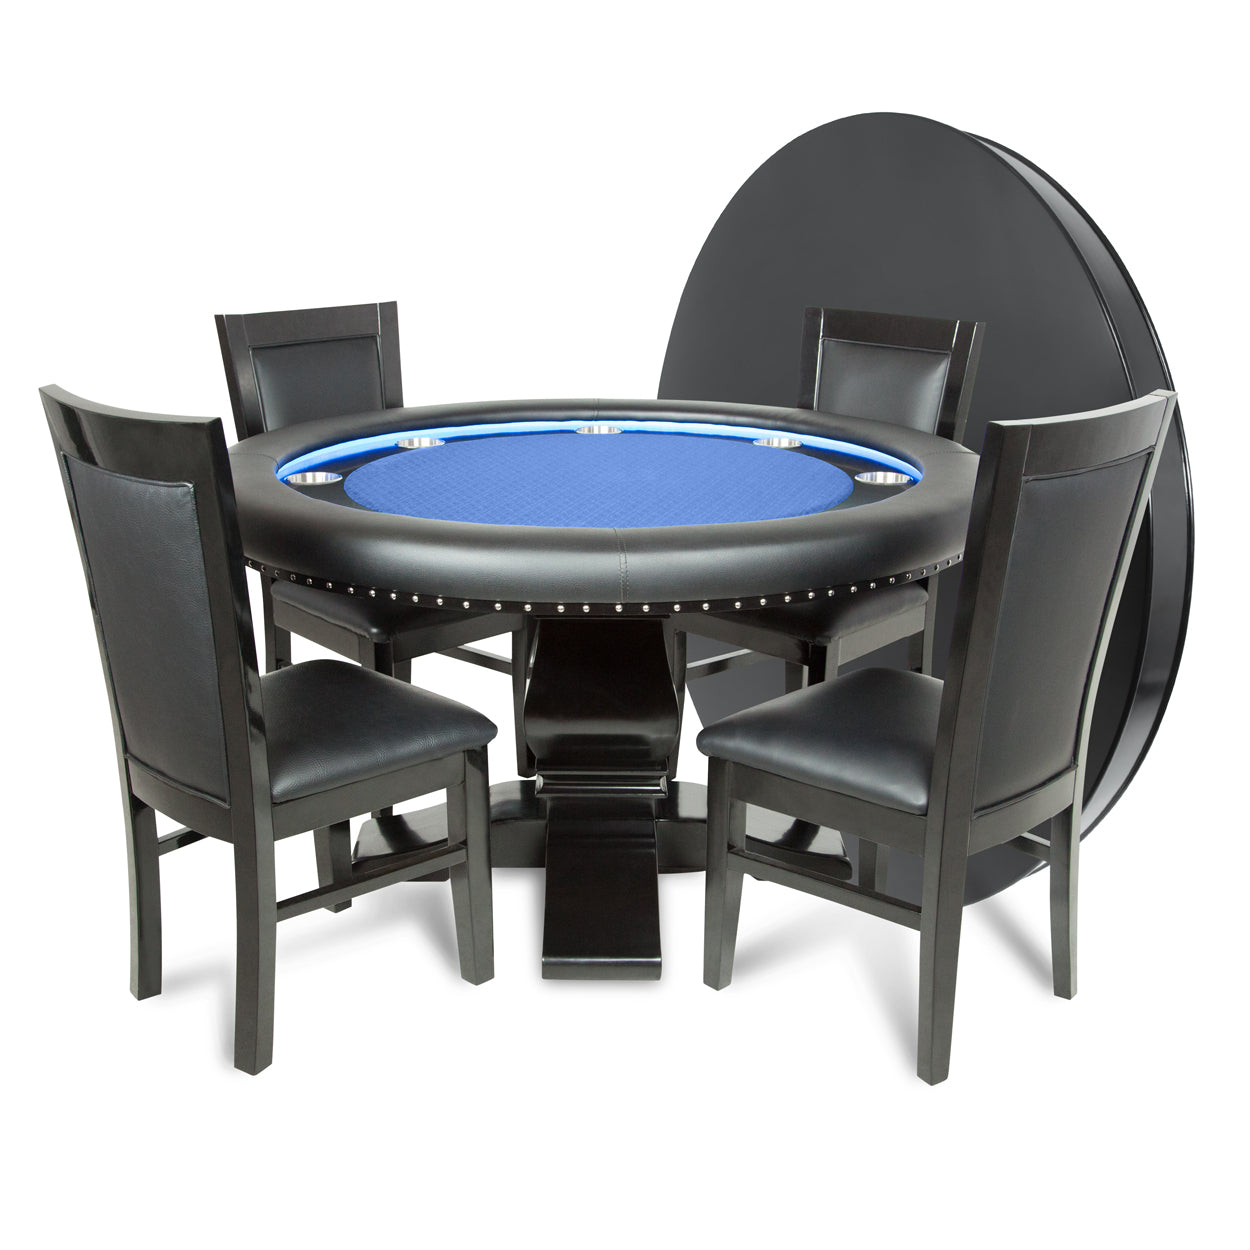 BBO The Ginza LED Premium Poker Table blue speedcloth with dining top and chairs 